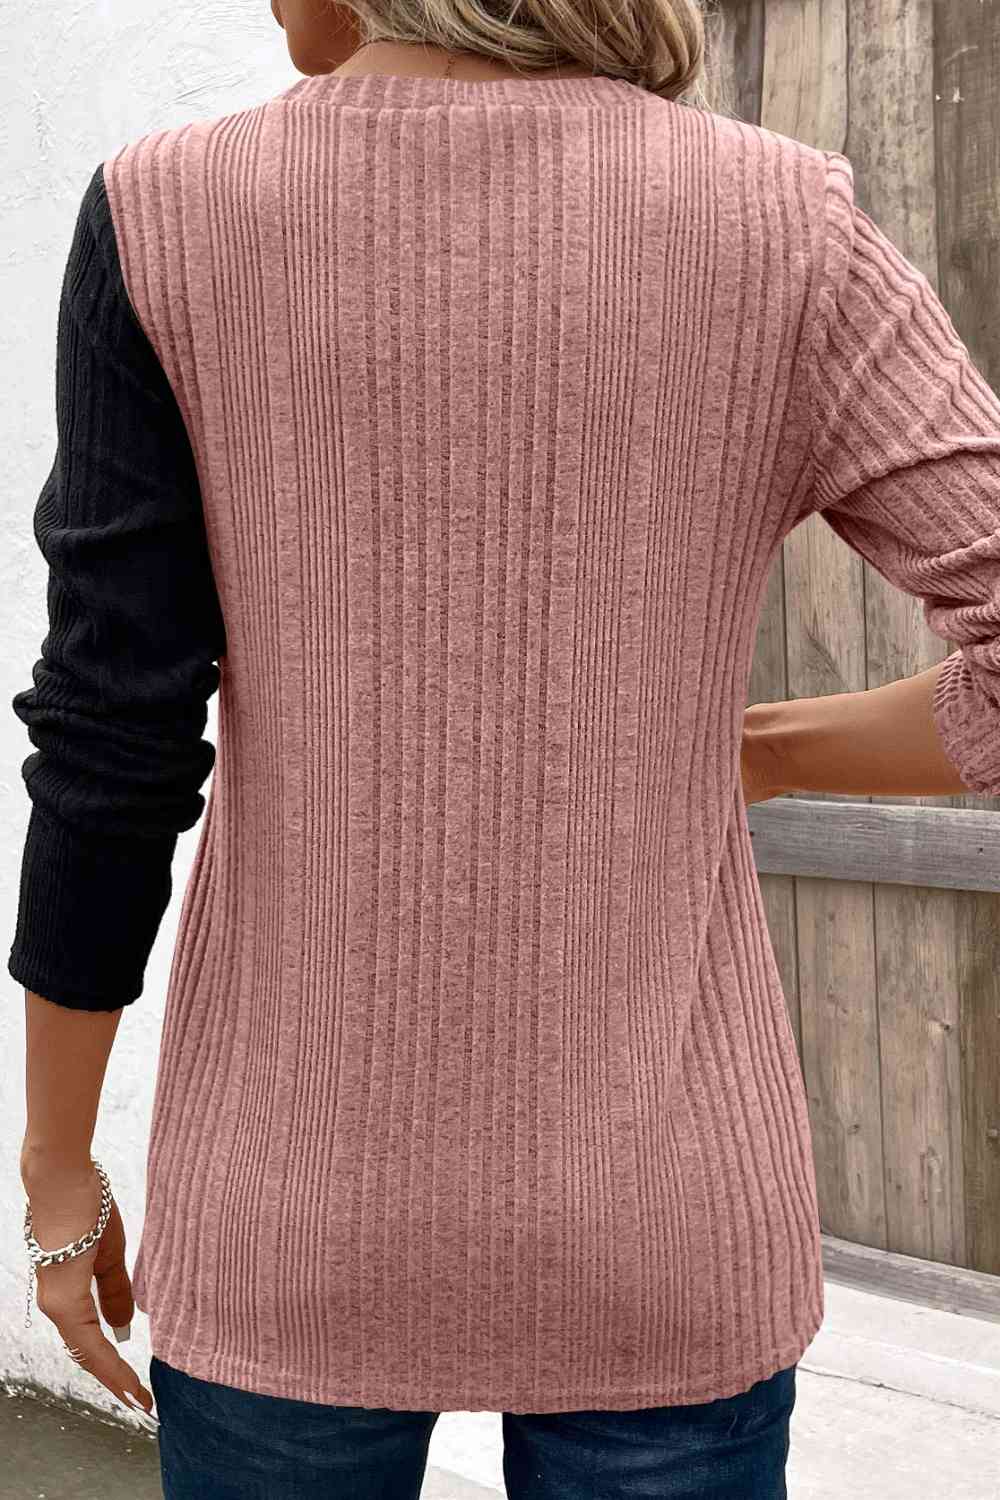 Contrast Long Sleeve Knit Top